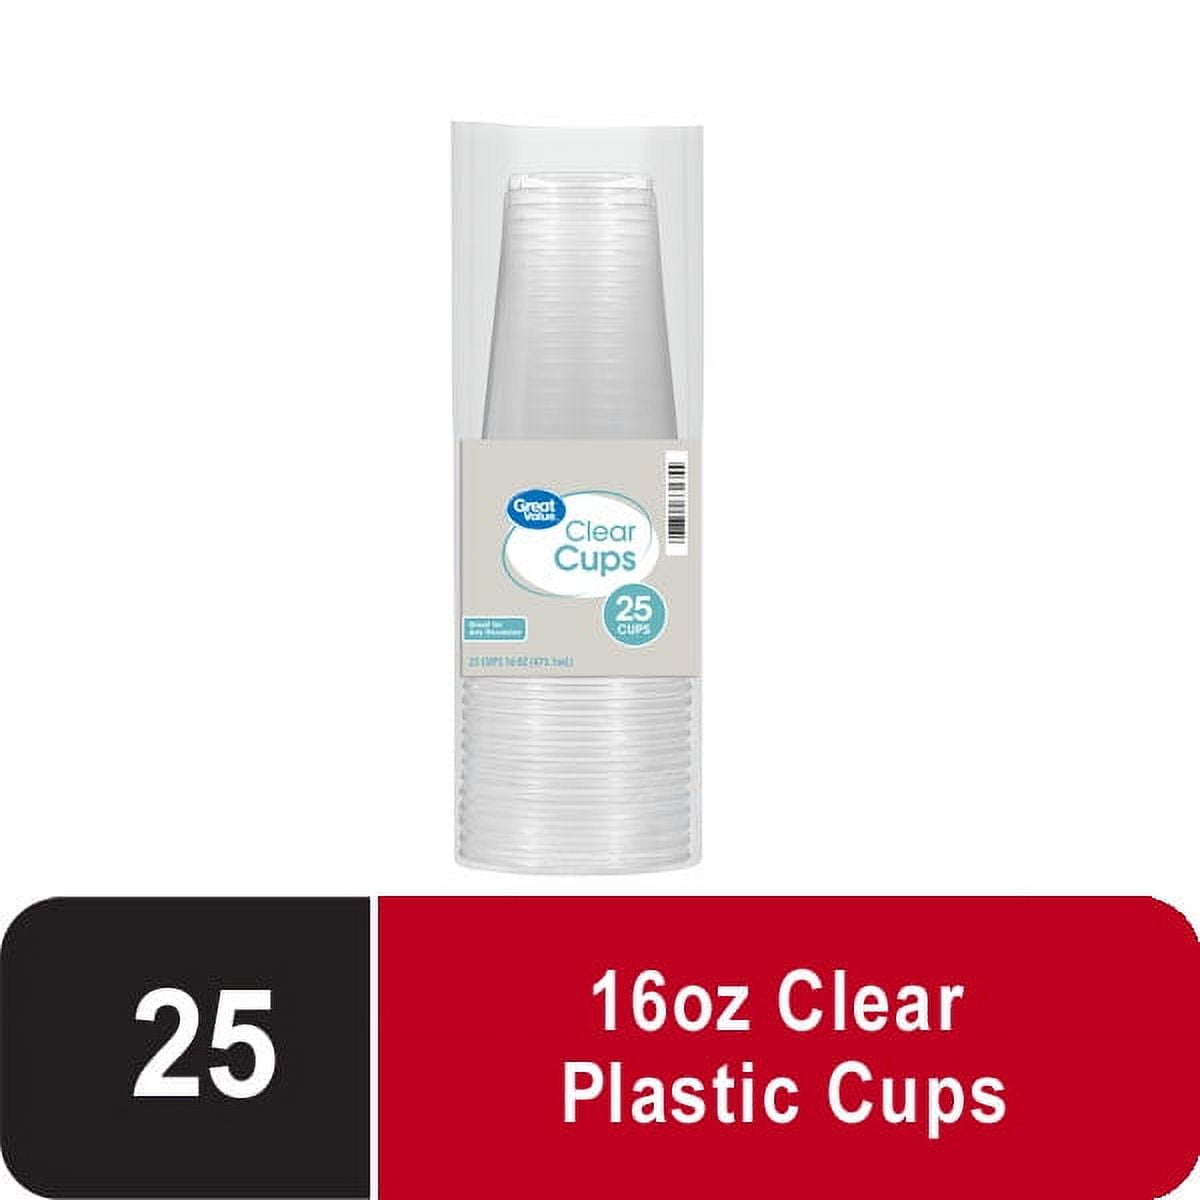 16 oz. BPA Free Clear Plastic Disposable Cup (ST31416CP) - starting  quantity 100 count - FREE SHIPPING - ePackageSupply